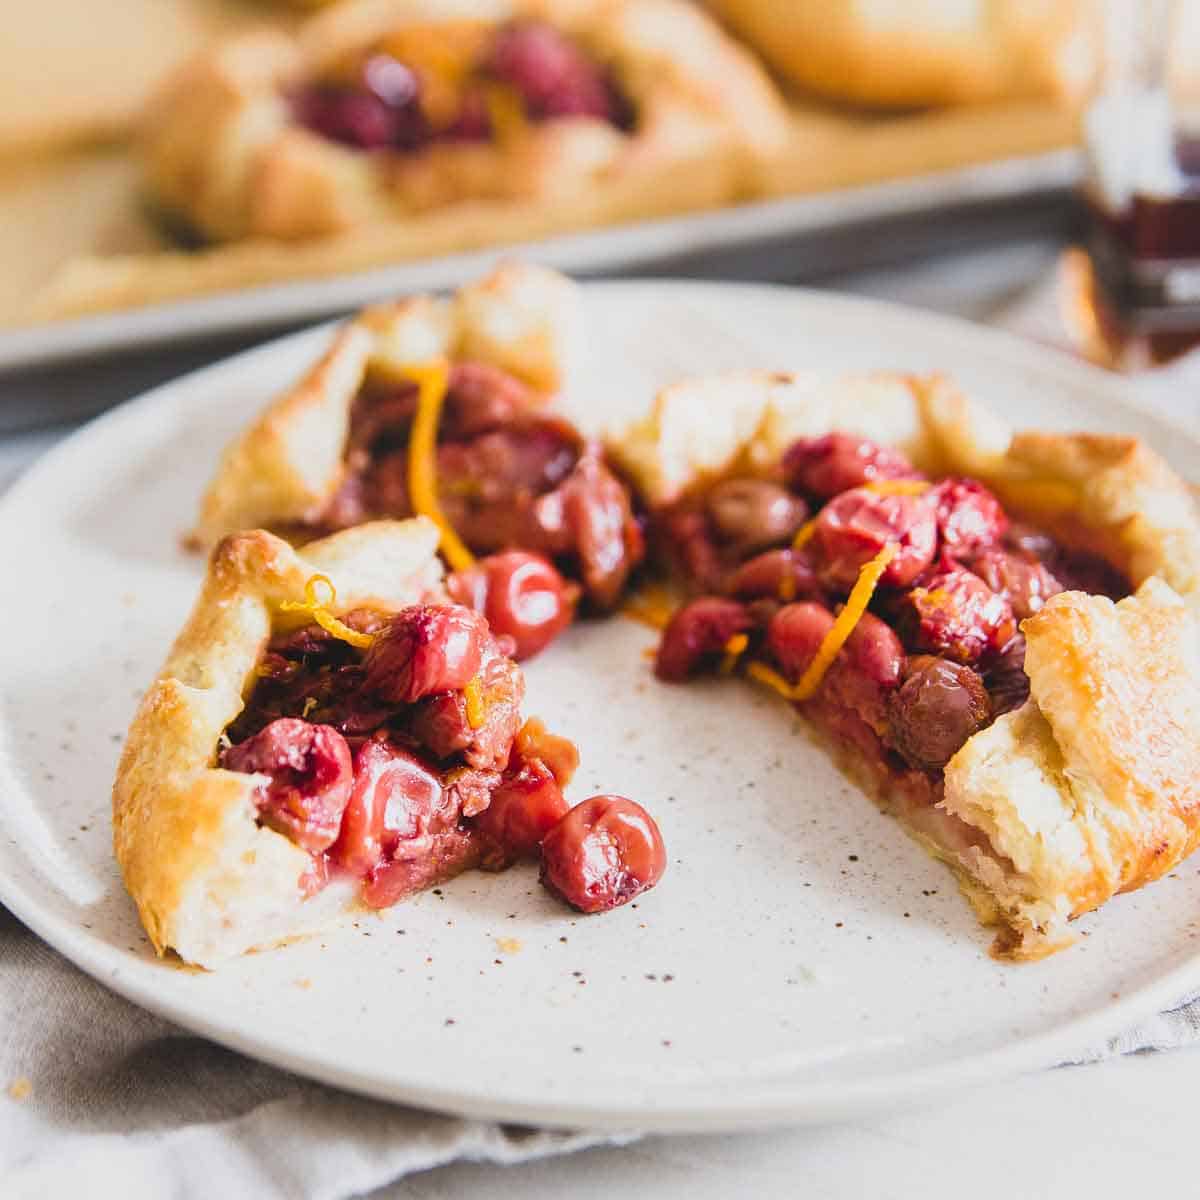 Next time you're craving cherry pie, try one of these mini sour cherry galettes with orange zest and maple syrup.